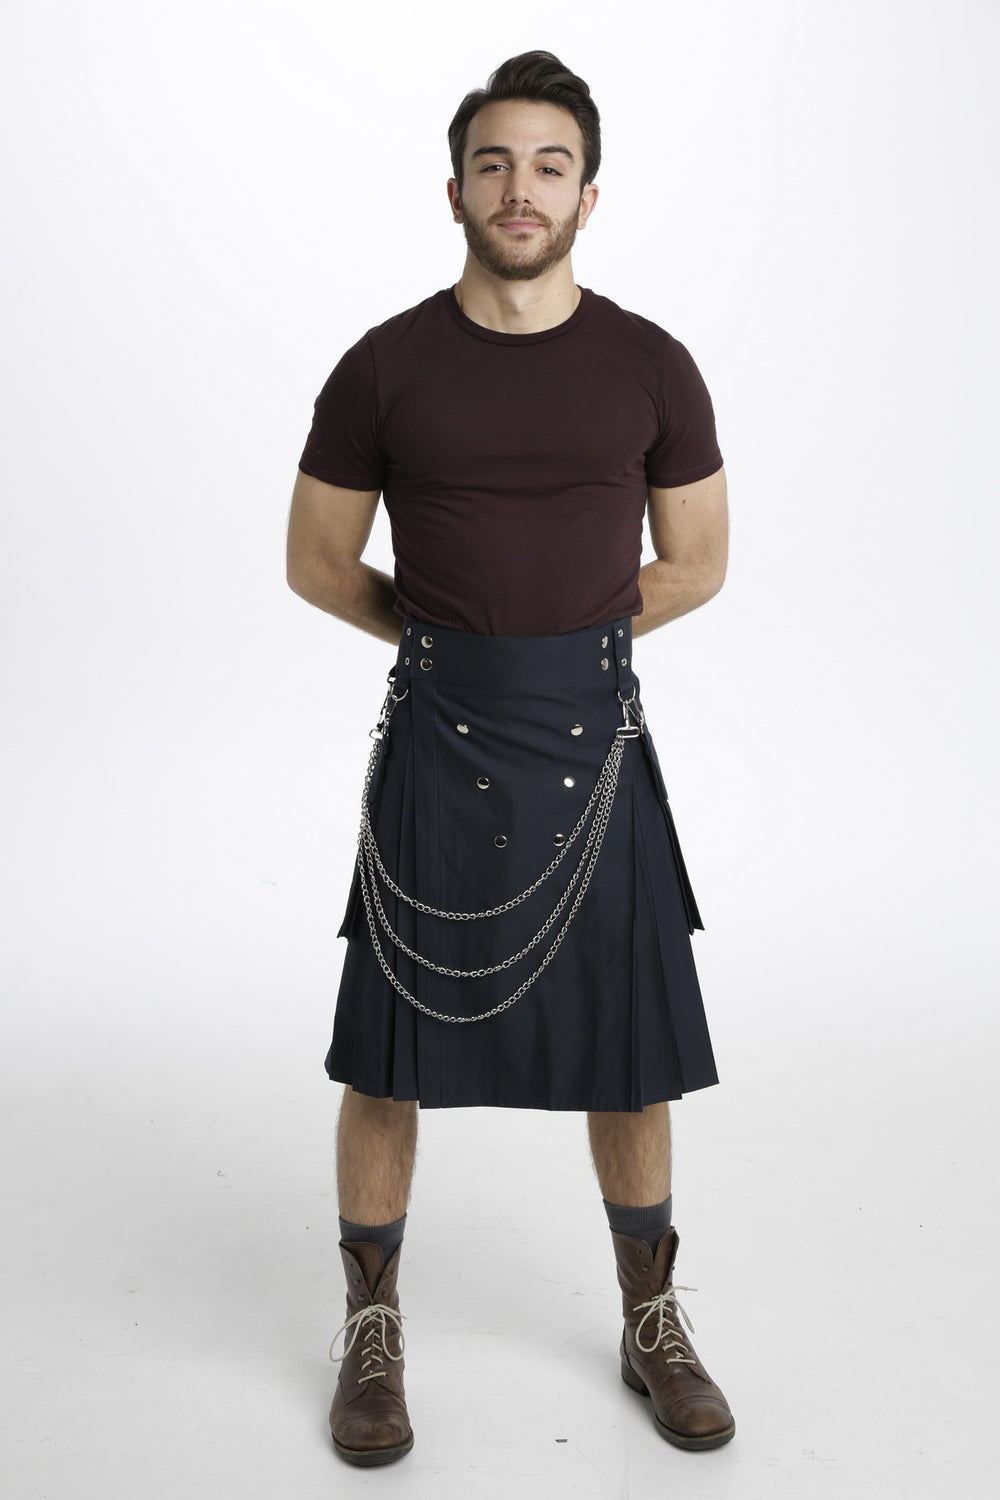 The Royal men Utility Kilt is a handsome cotton kilt that is designed to keep you comfortable during any warm month with its lightweight and breathable nature. It features hooks on either side from which you can hang chains or a sporran of your choice, while six studs adorn the front of the kilt to add some detail